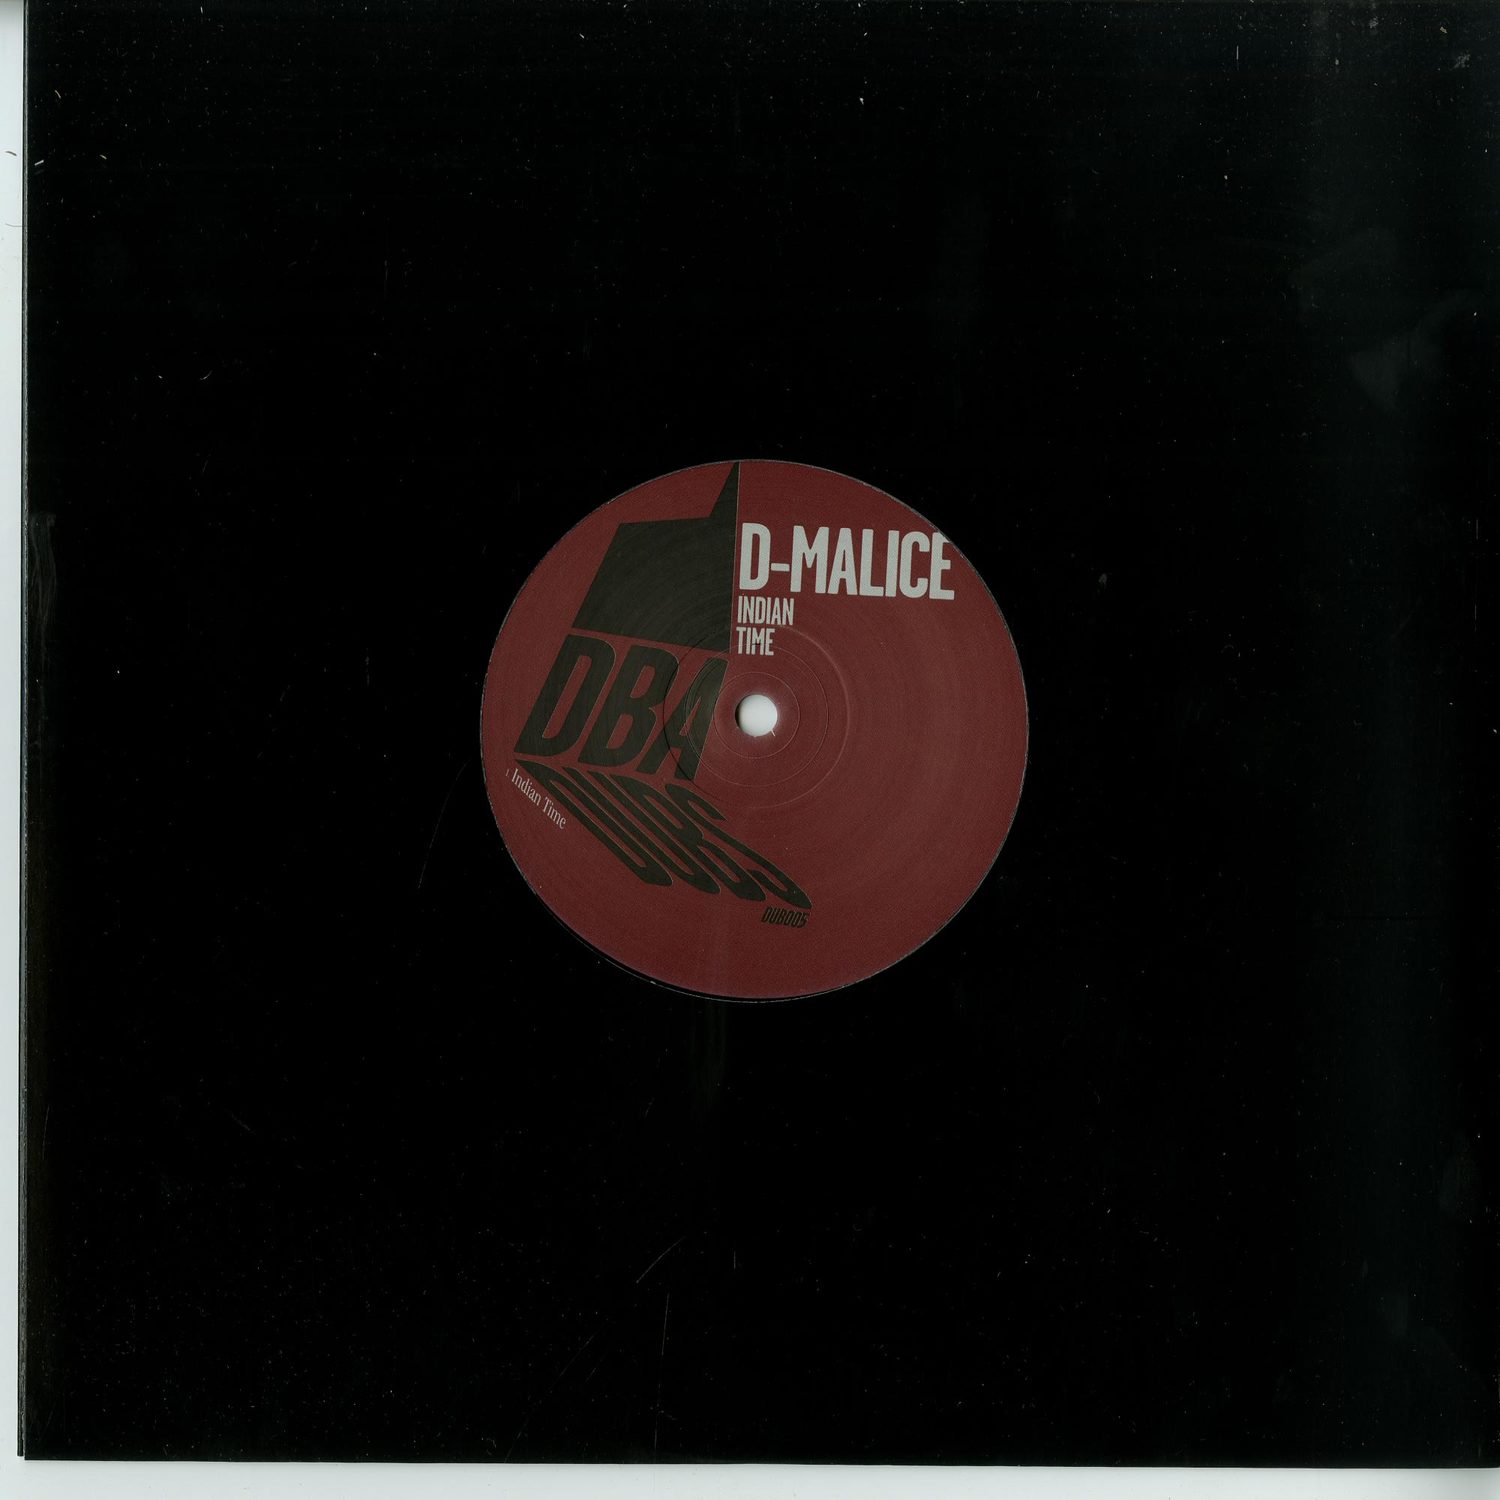 D-Malice - INDIAN TIME 